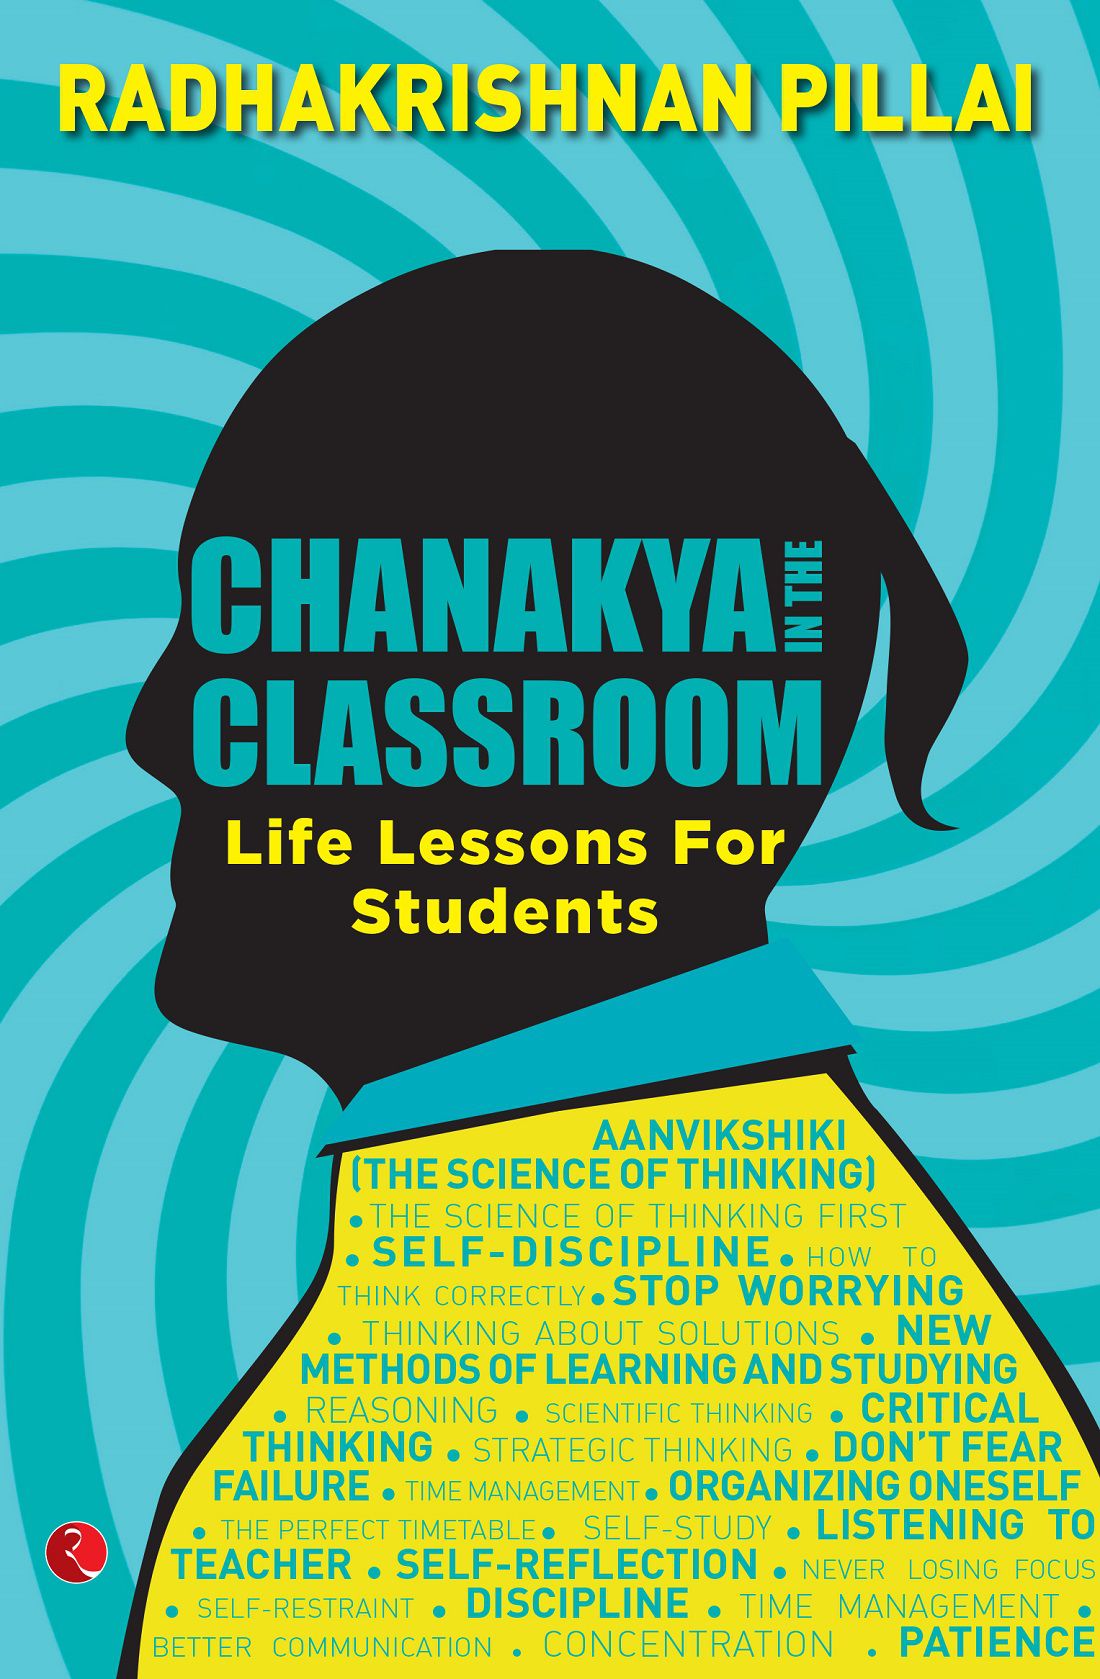     			Chanakya In the Classroom: Life Lessons for Students by Radhakrishnan Pillai